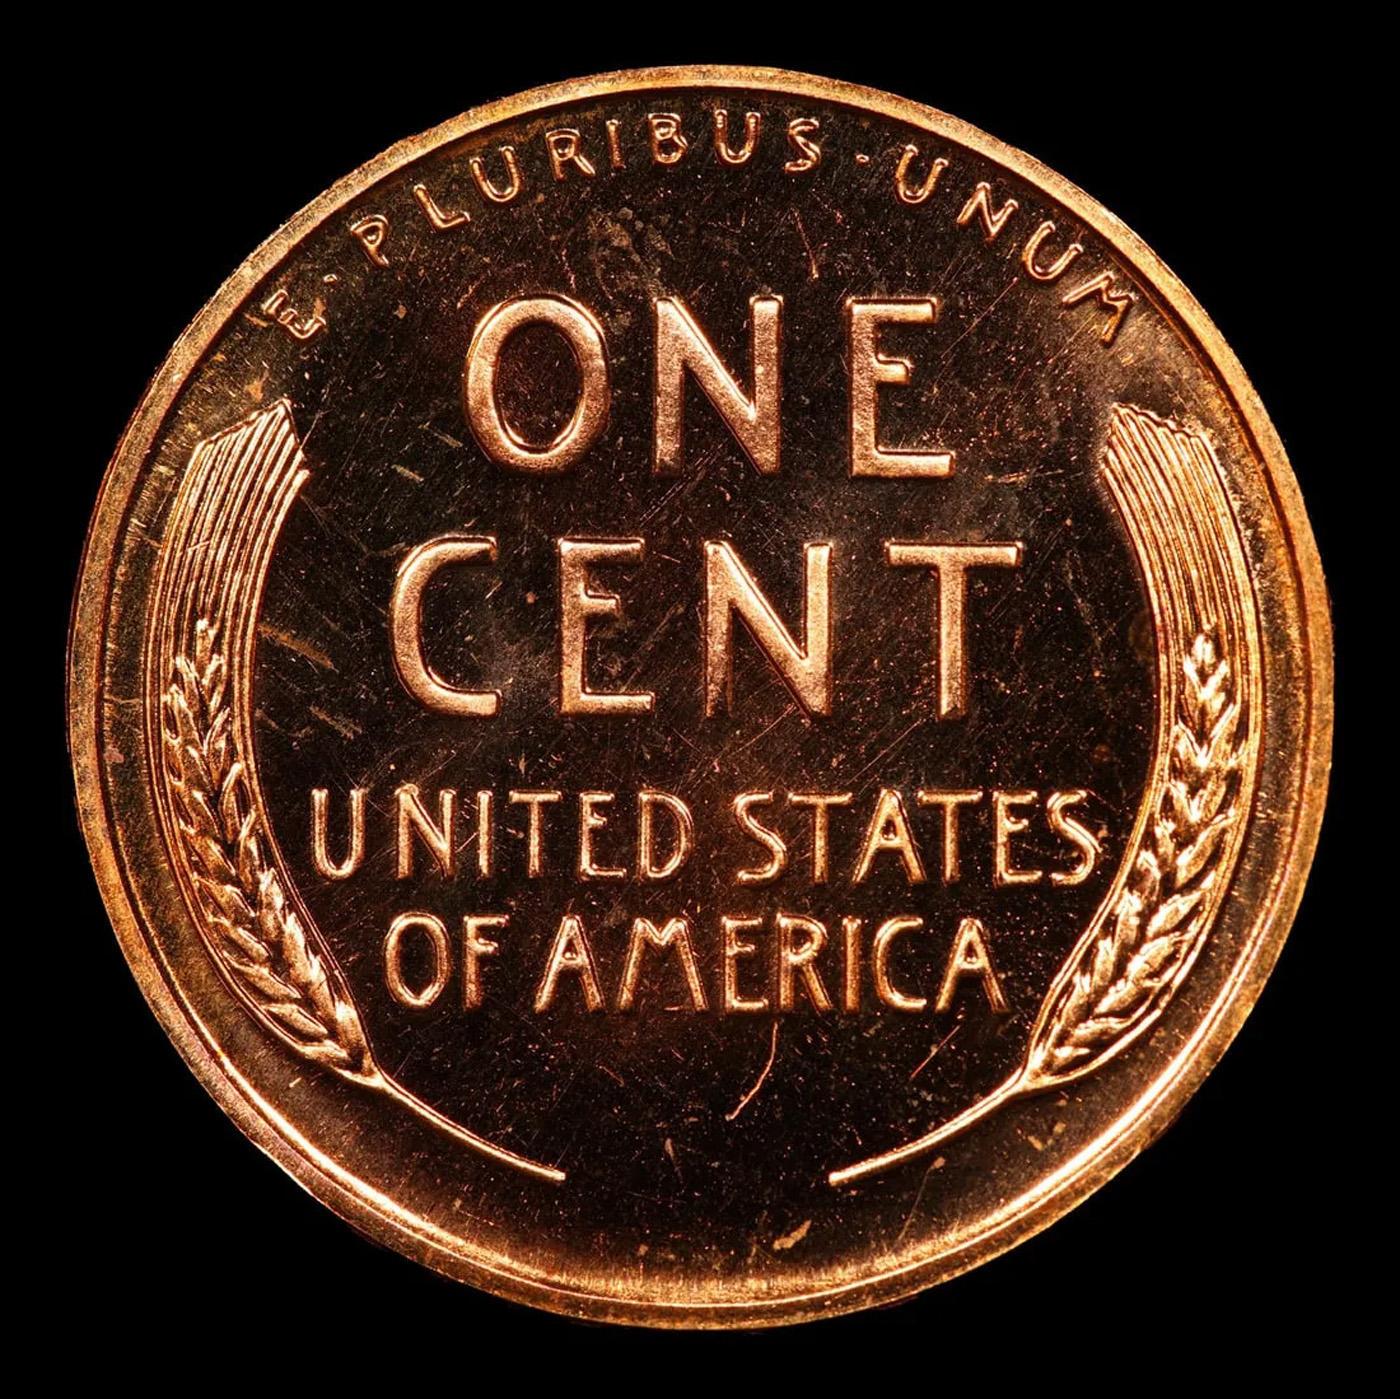 Proof 1955 Lincoln Cent 1c Graded pr67 rd cam BY SEGS